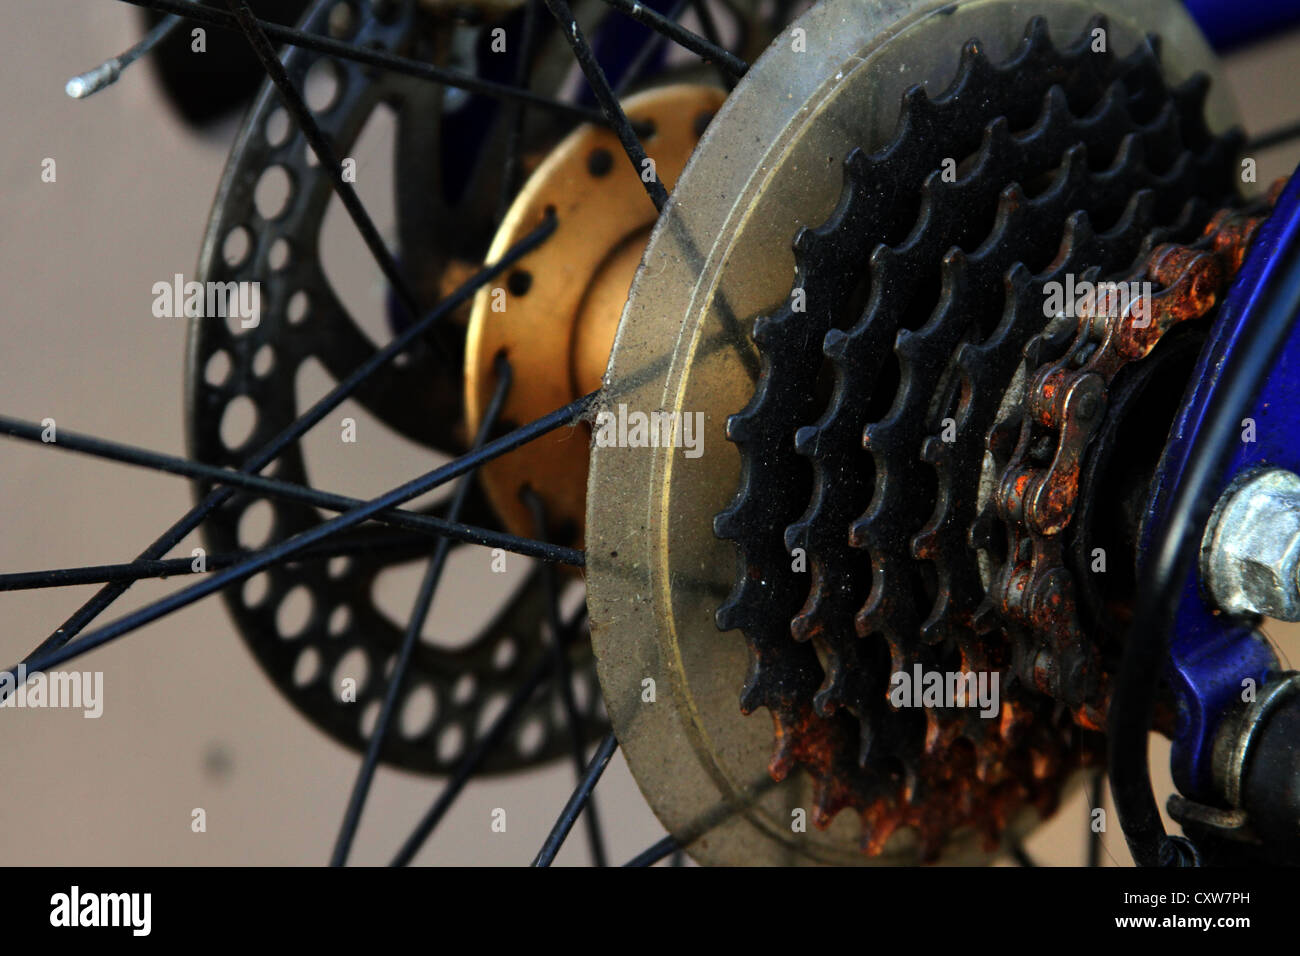 Bicycle gear assembly, freewheel and a rusty chain, the image showing the state of the gears and chain assembly hours after rain Stock Photo